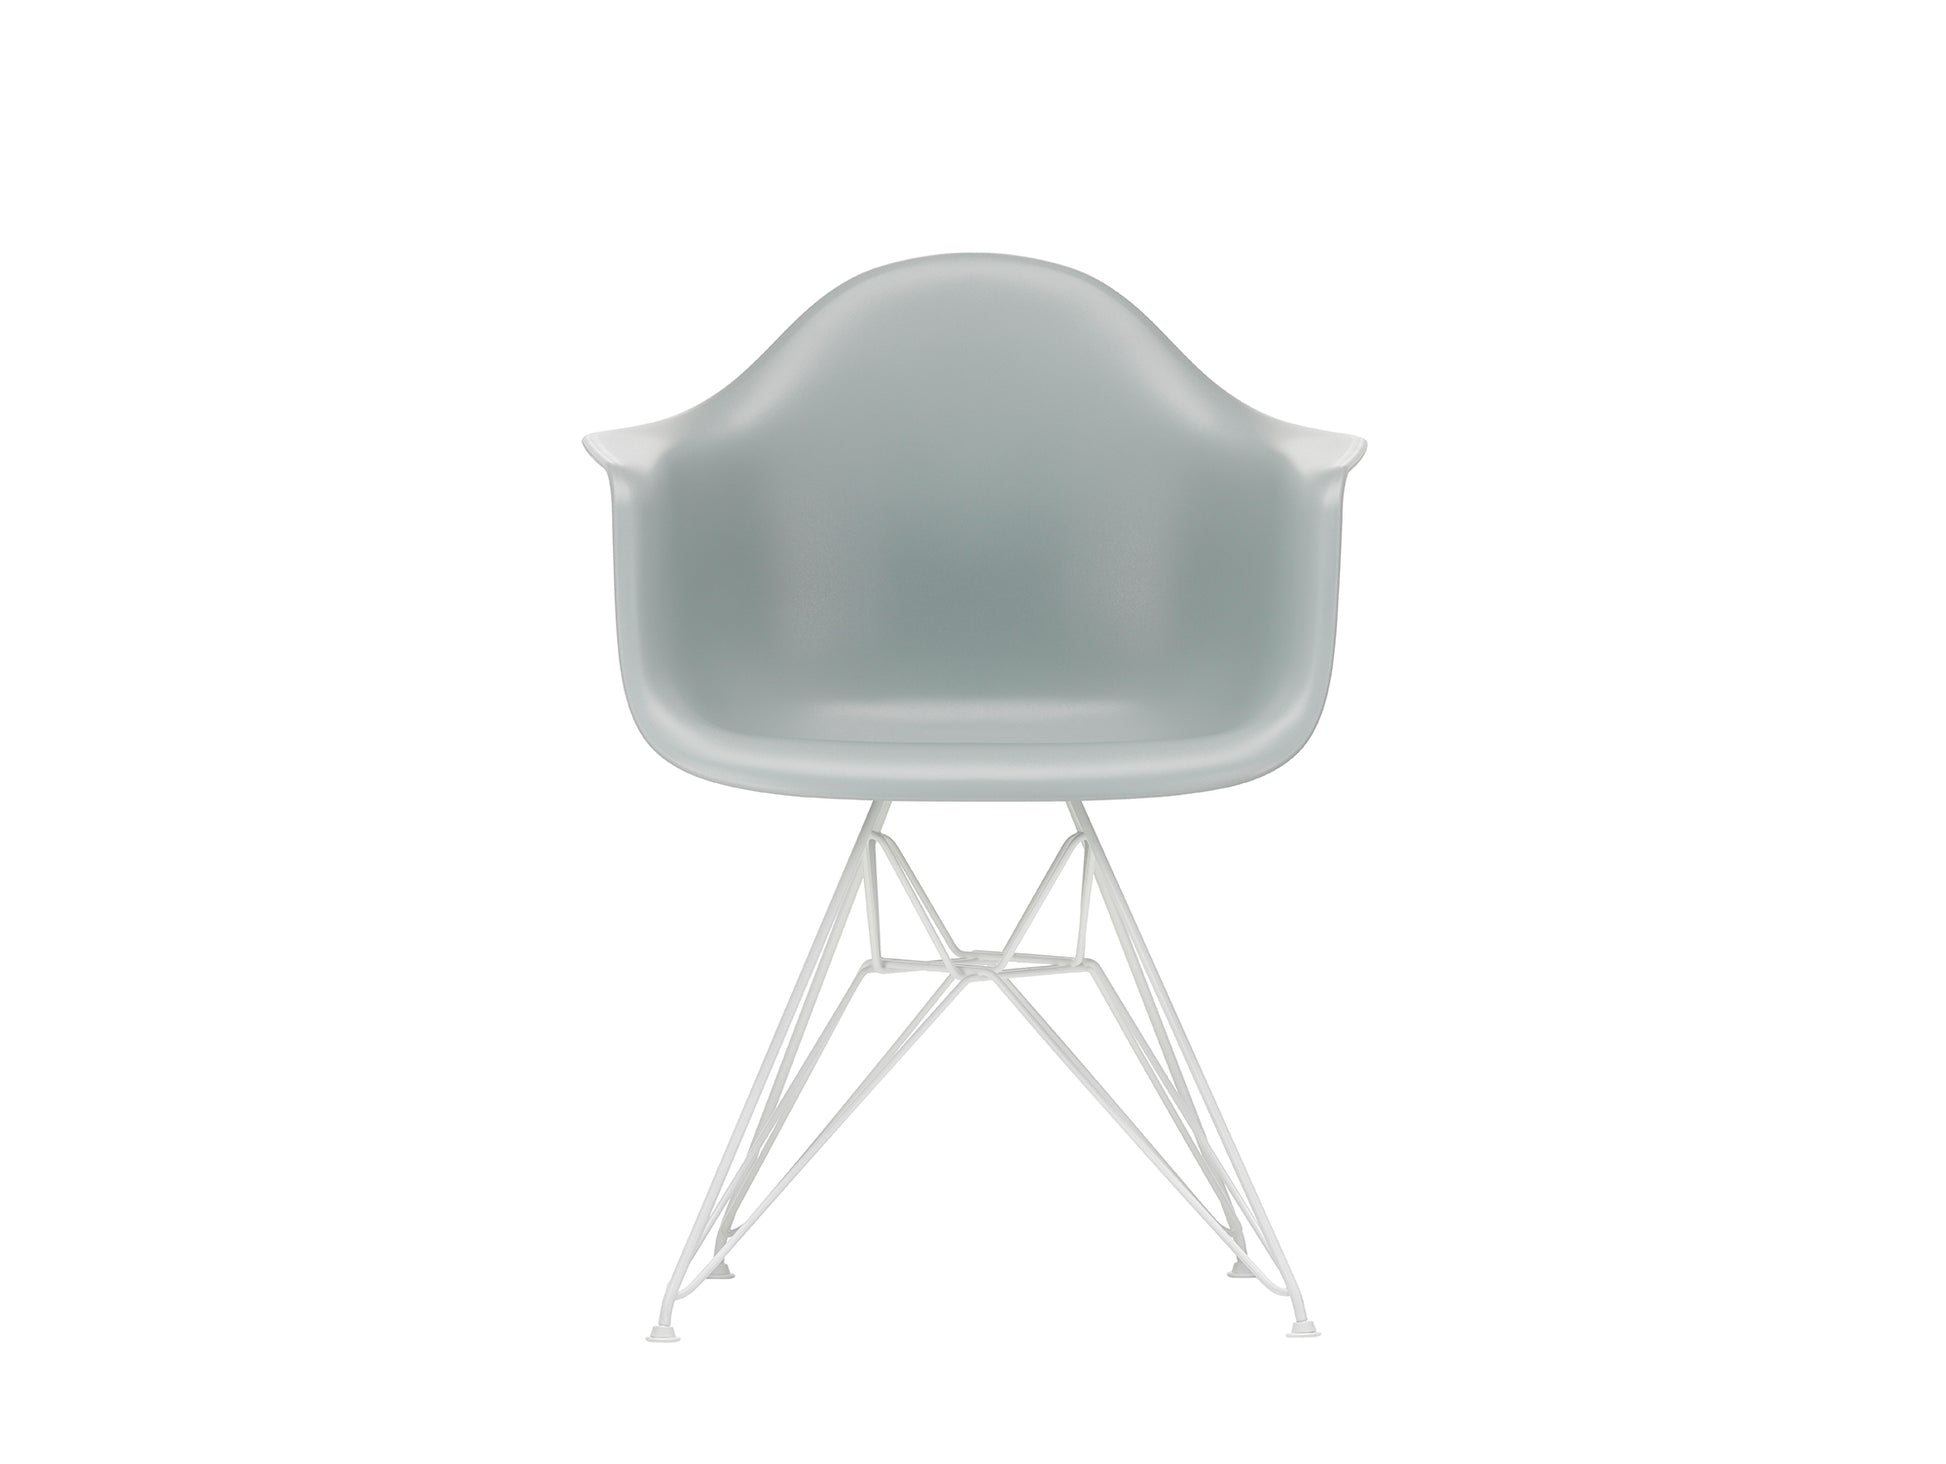 Eames DAR Plastic Armchair RE by Vitra - 24 Light Grey Shell / White Base